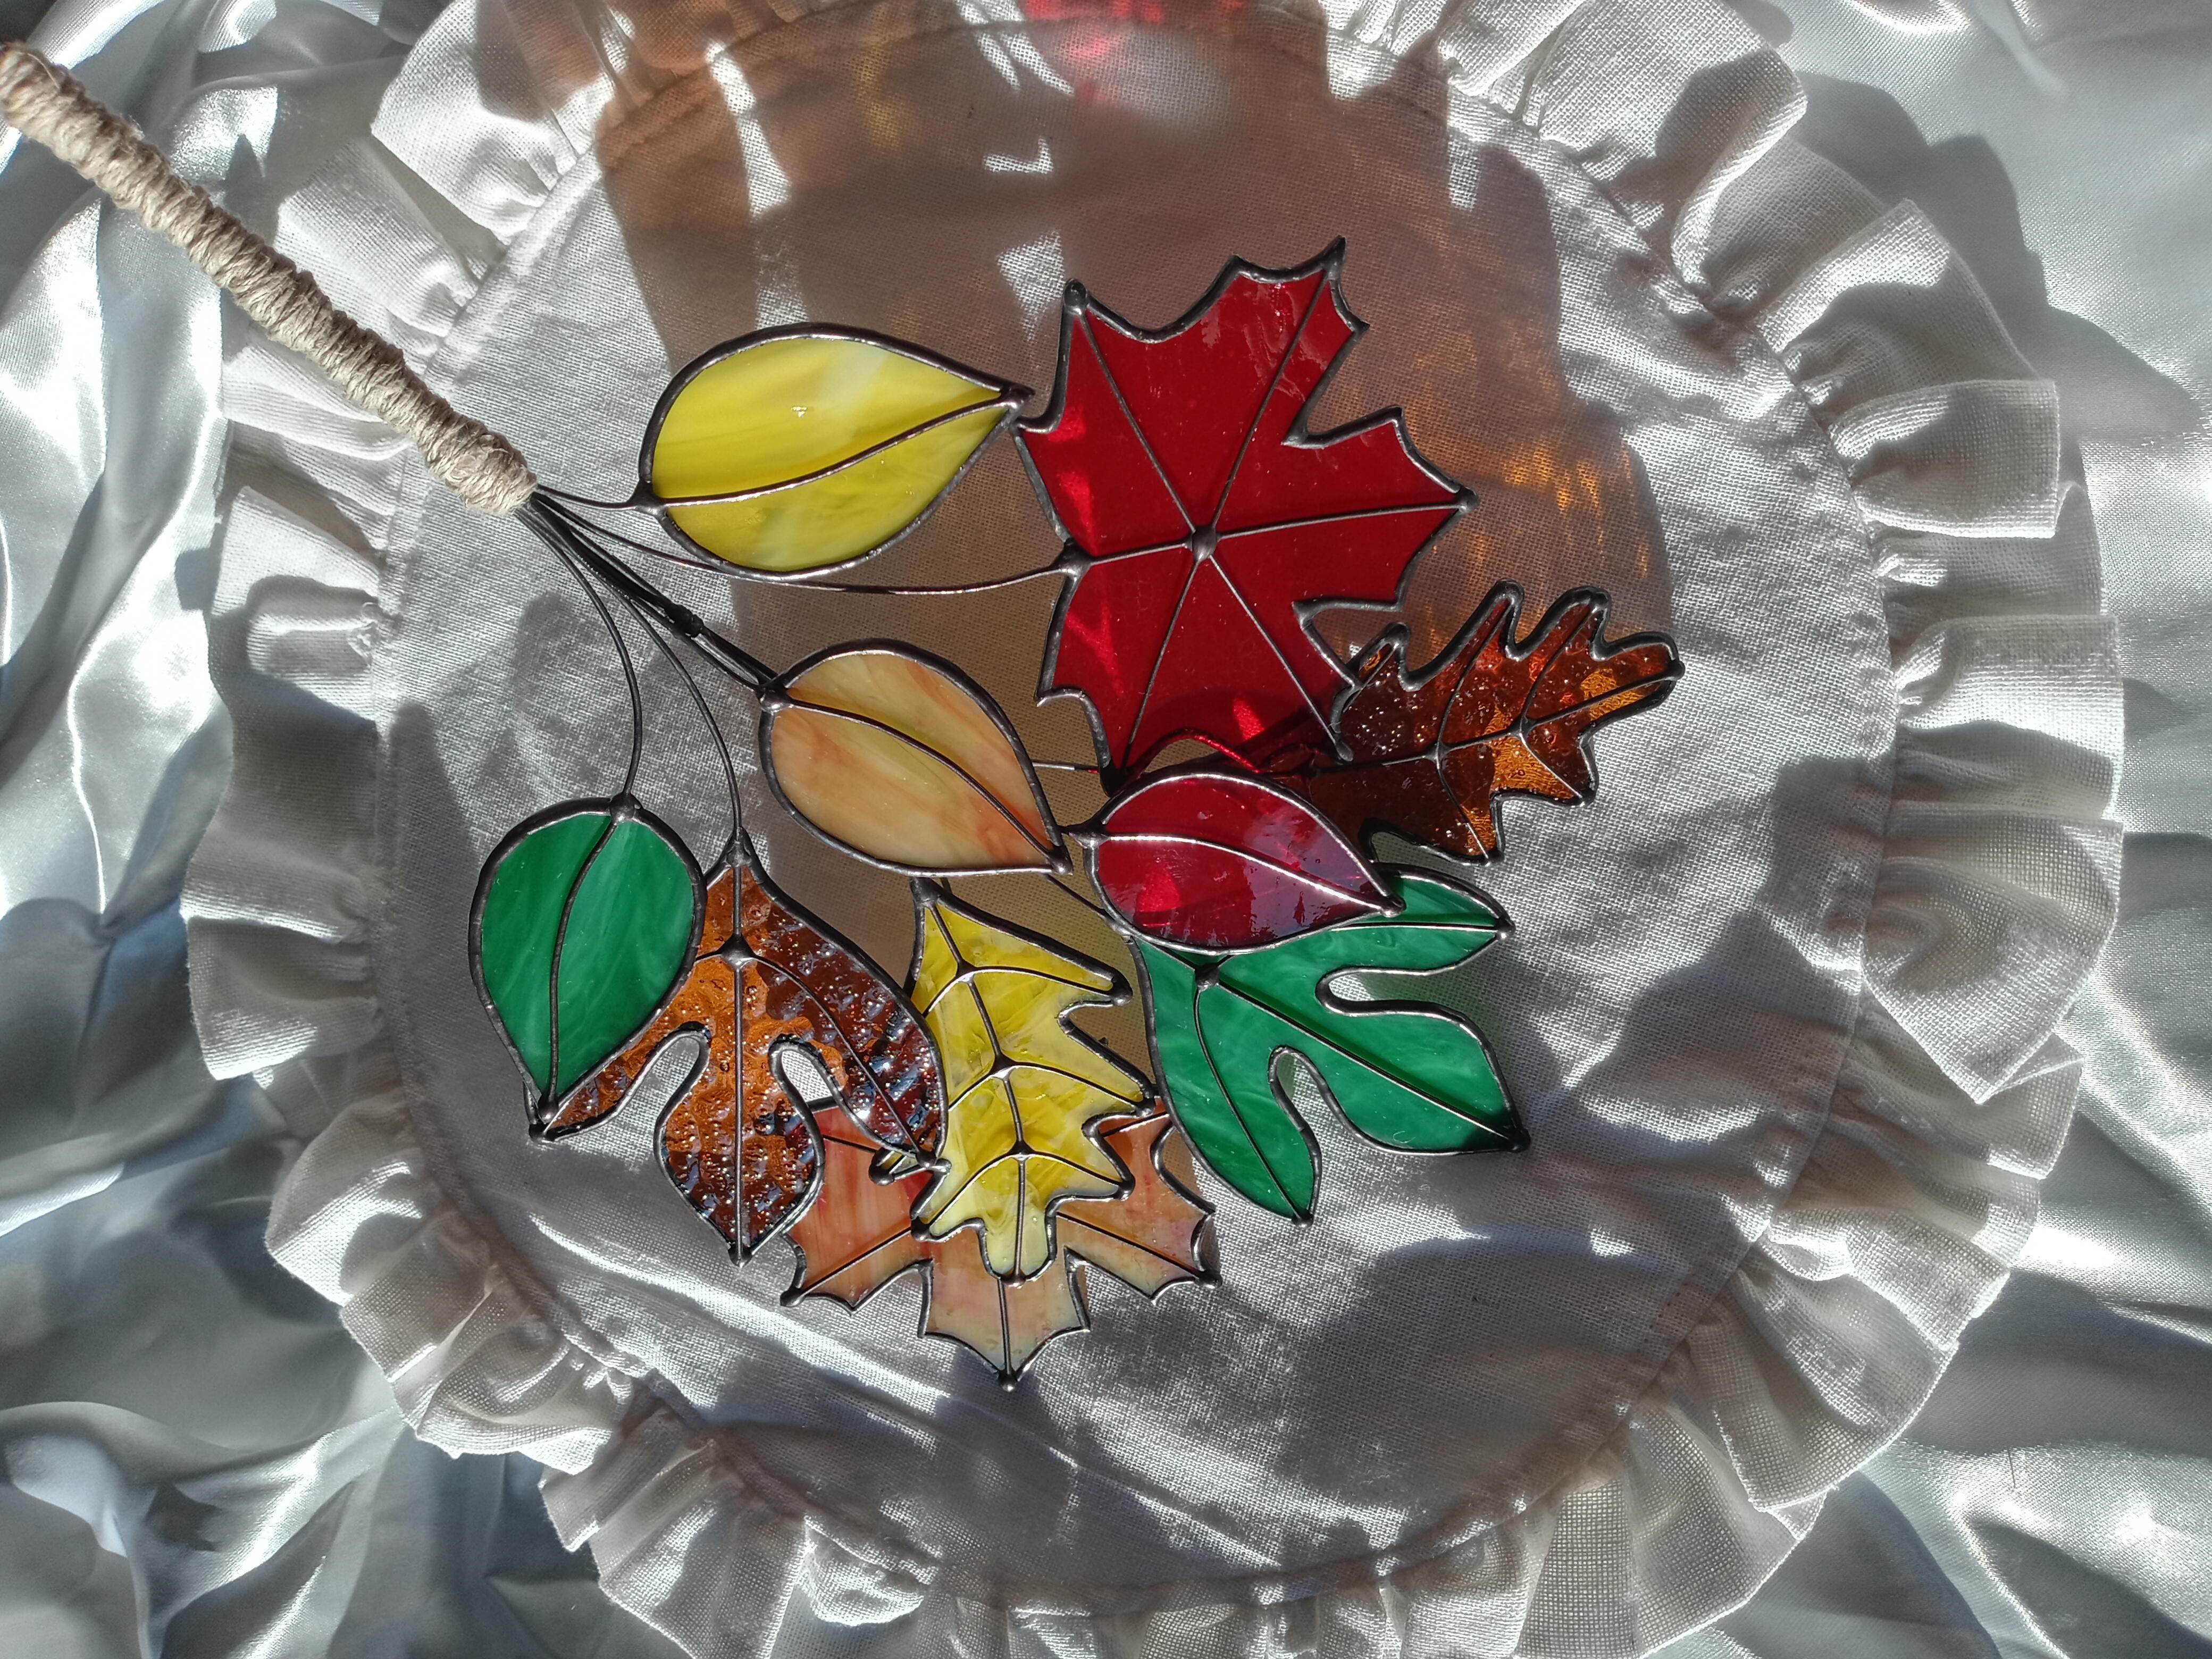 Girl Wearing A Hat Halloween Suncatcher Wreath Sign,stained Glass